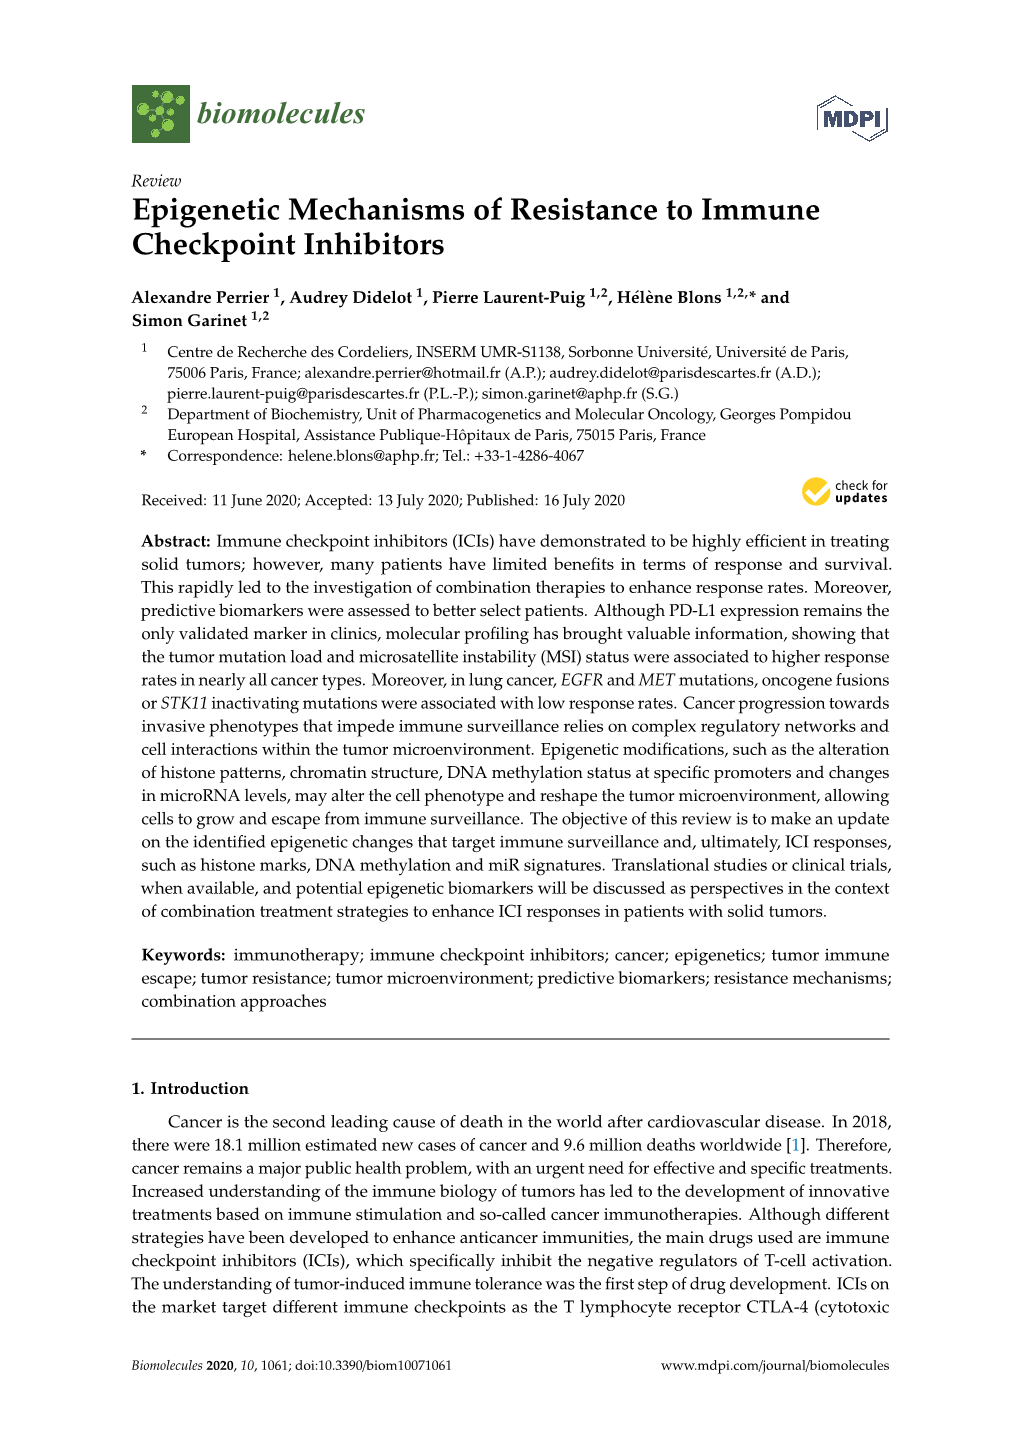 Epigenetic Mechanisms of Resistance to Immune Checkpoint Inhibitors